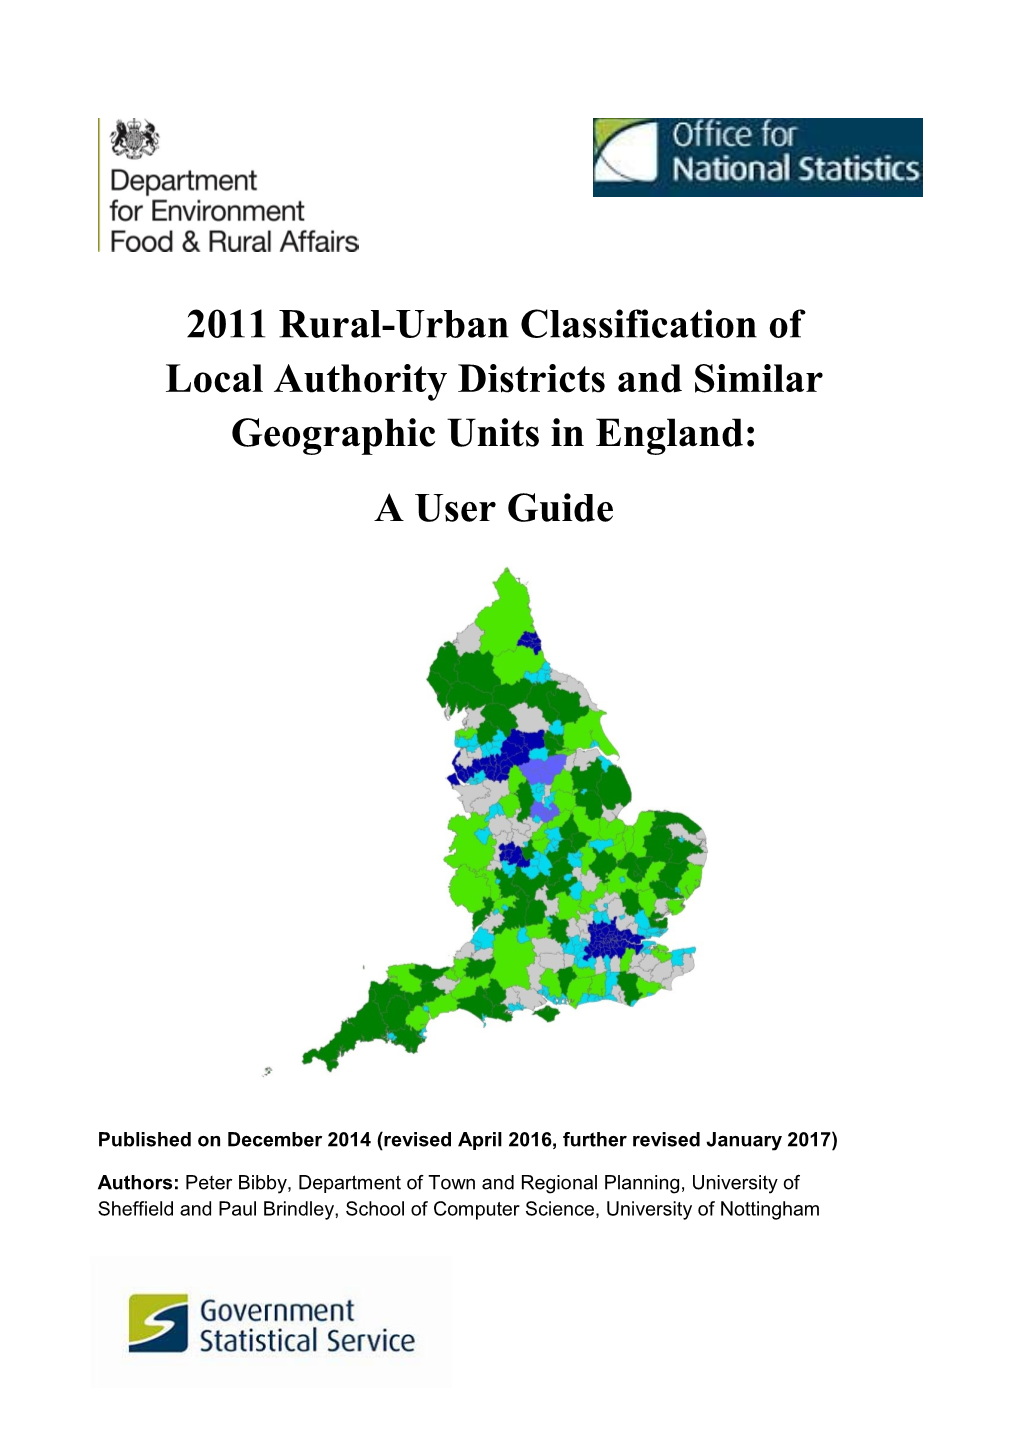 2011 Rural-Urban Classification of Local Authority Districts and Similar Geographic Units in England: a User Guide